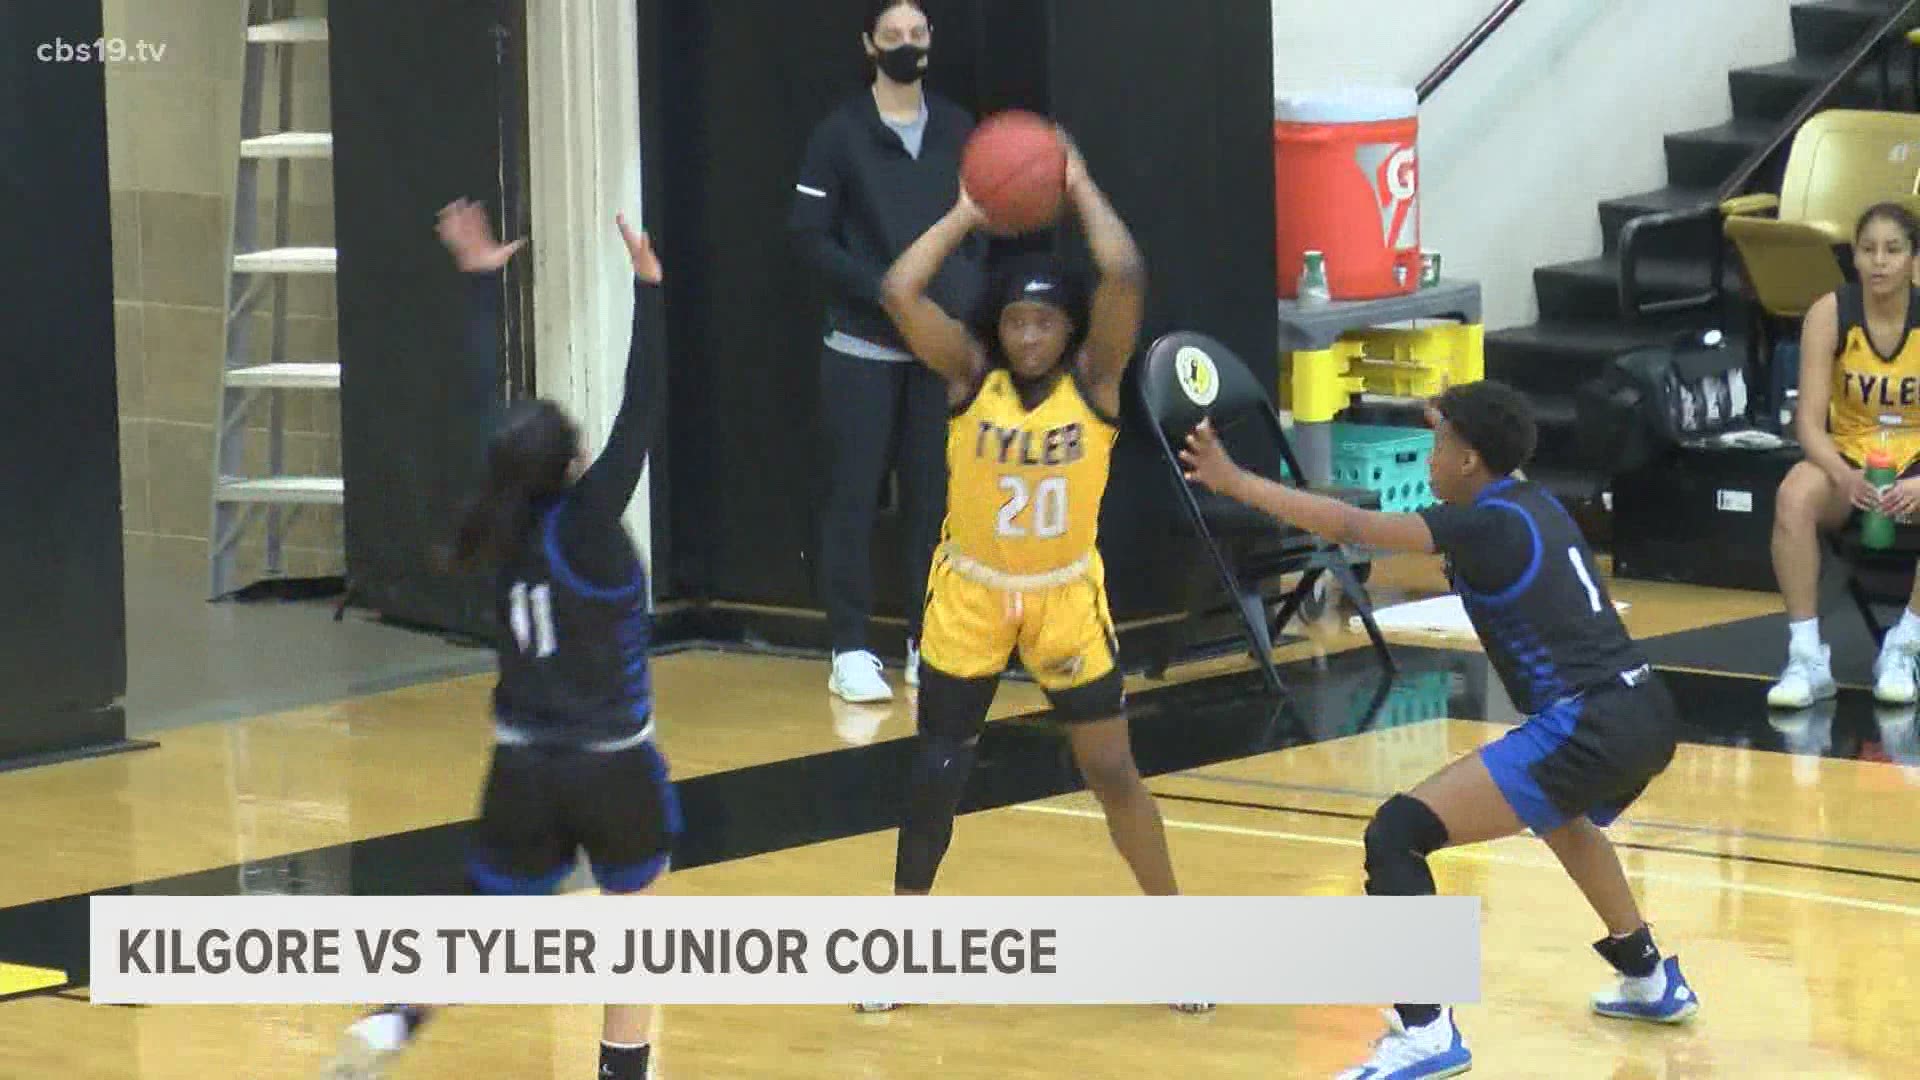 TJC looked sharp in a convincing 79-44 victory over rival Kilgore College Wednesday night